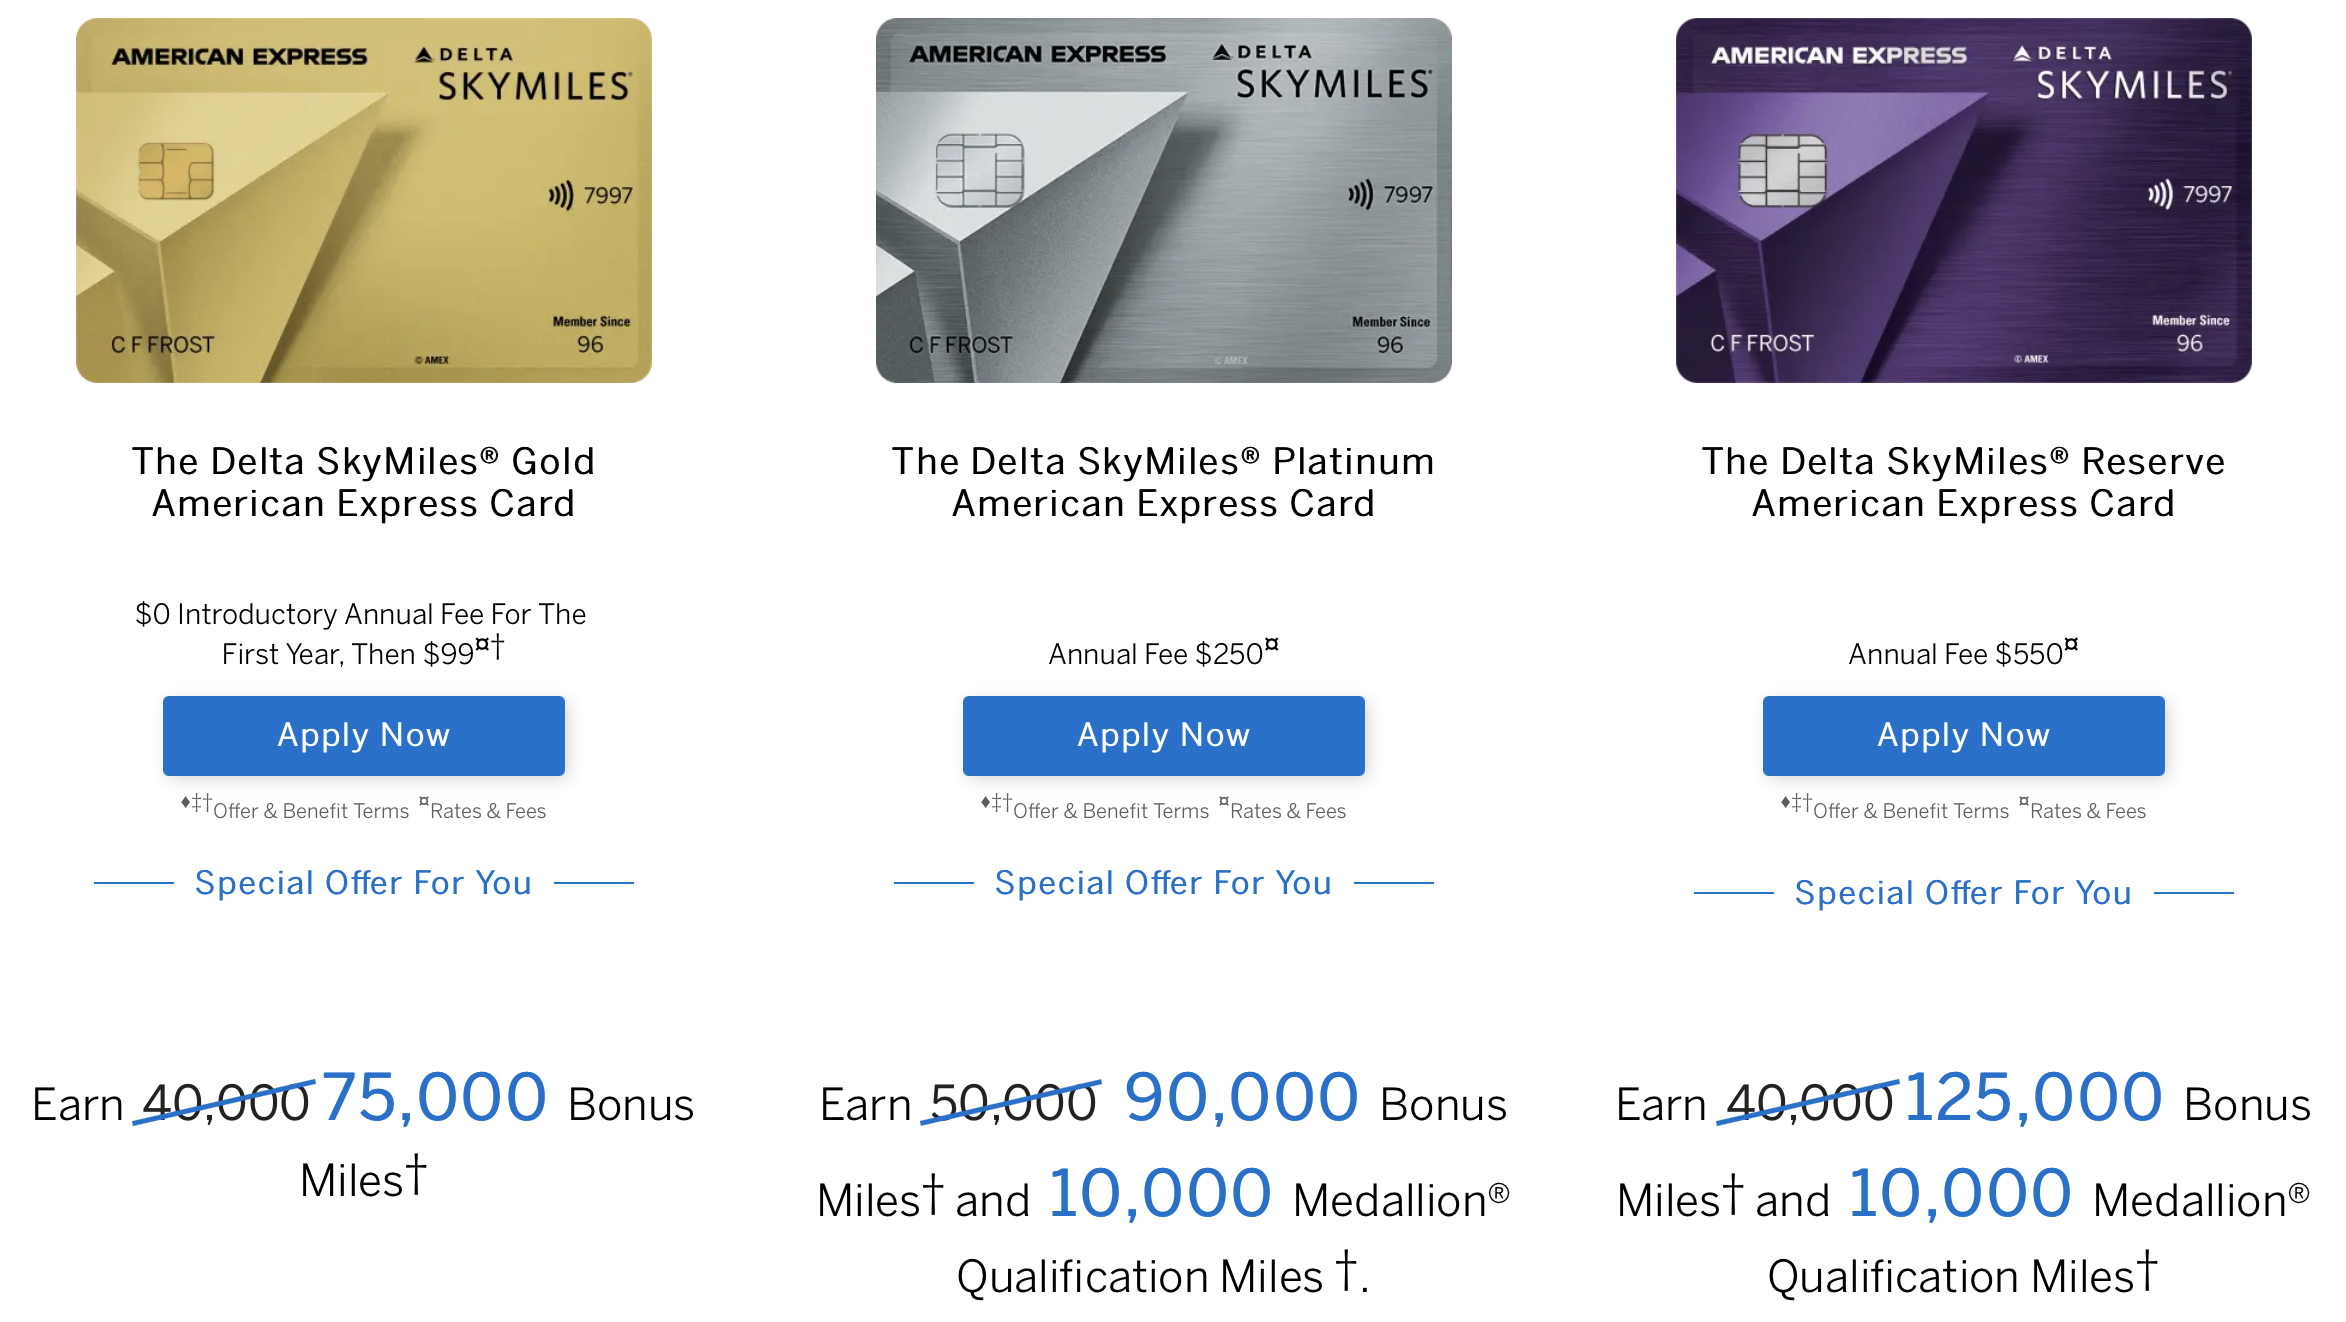 Delta Skymiles Reserve Card From American Express Review 2021 6 Update 80k Miles 20k Mqm 200 Offer Us Credit Card Guide